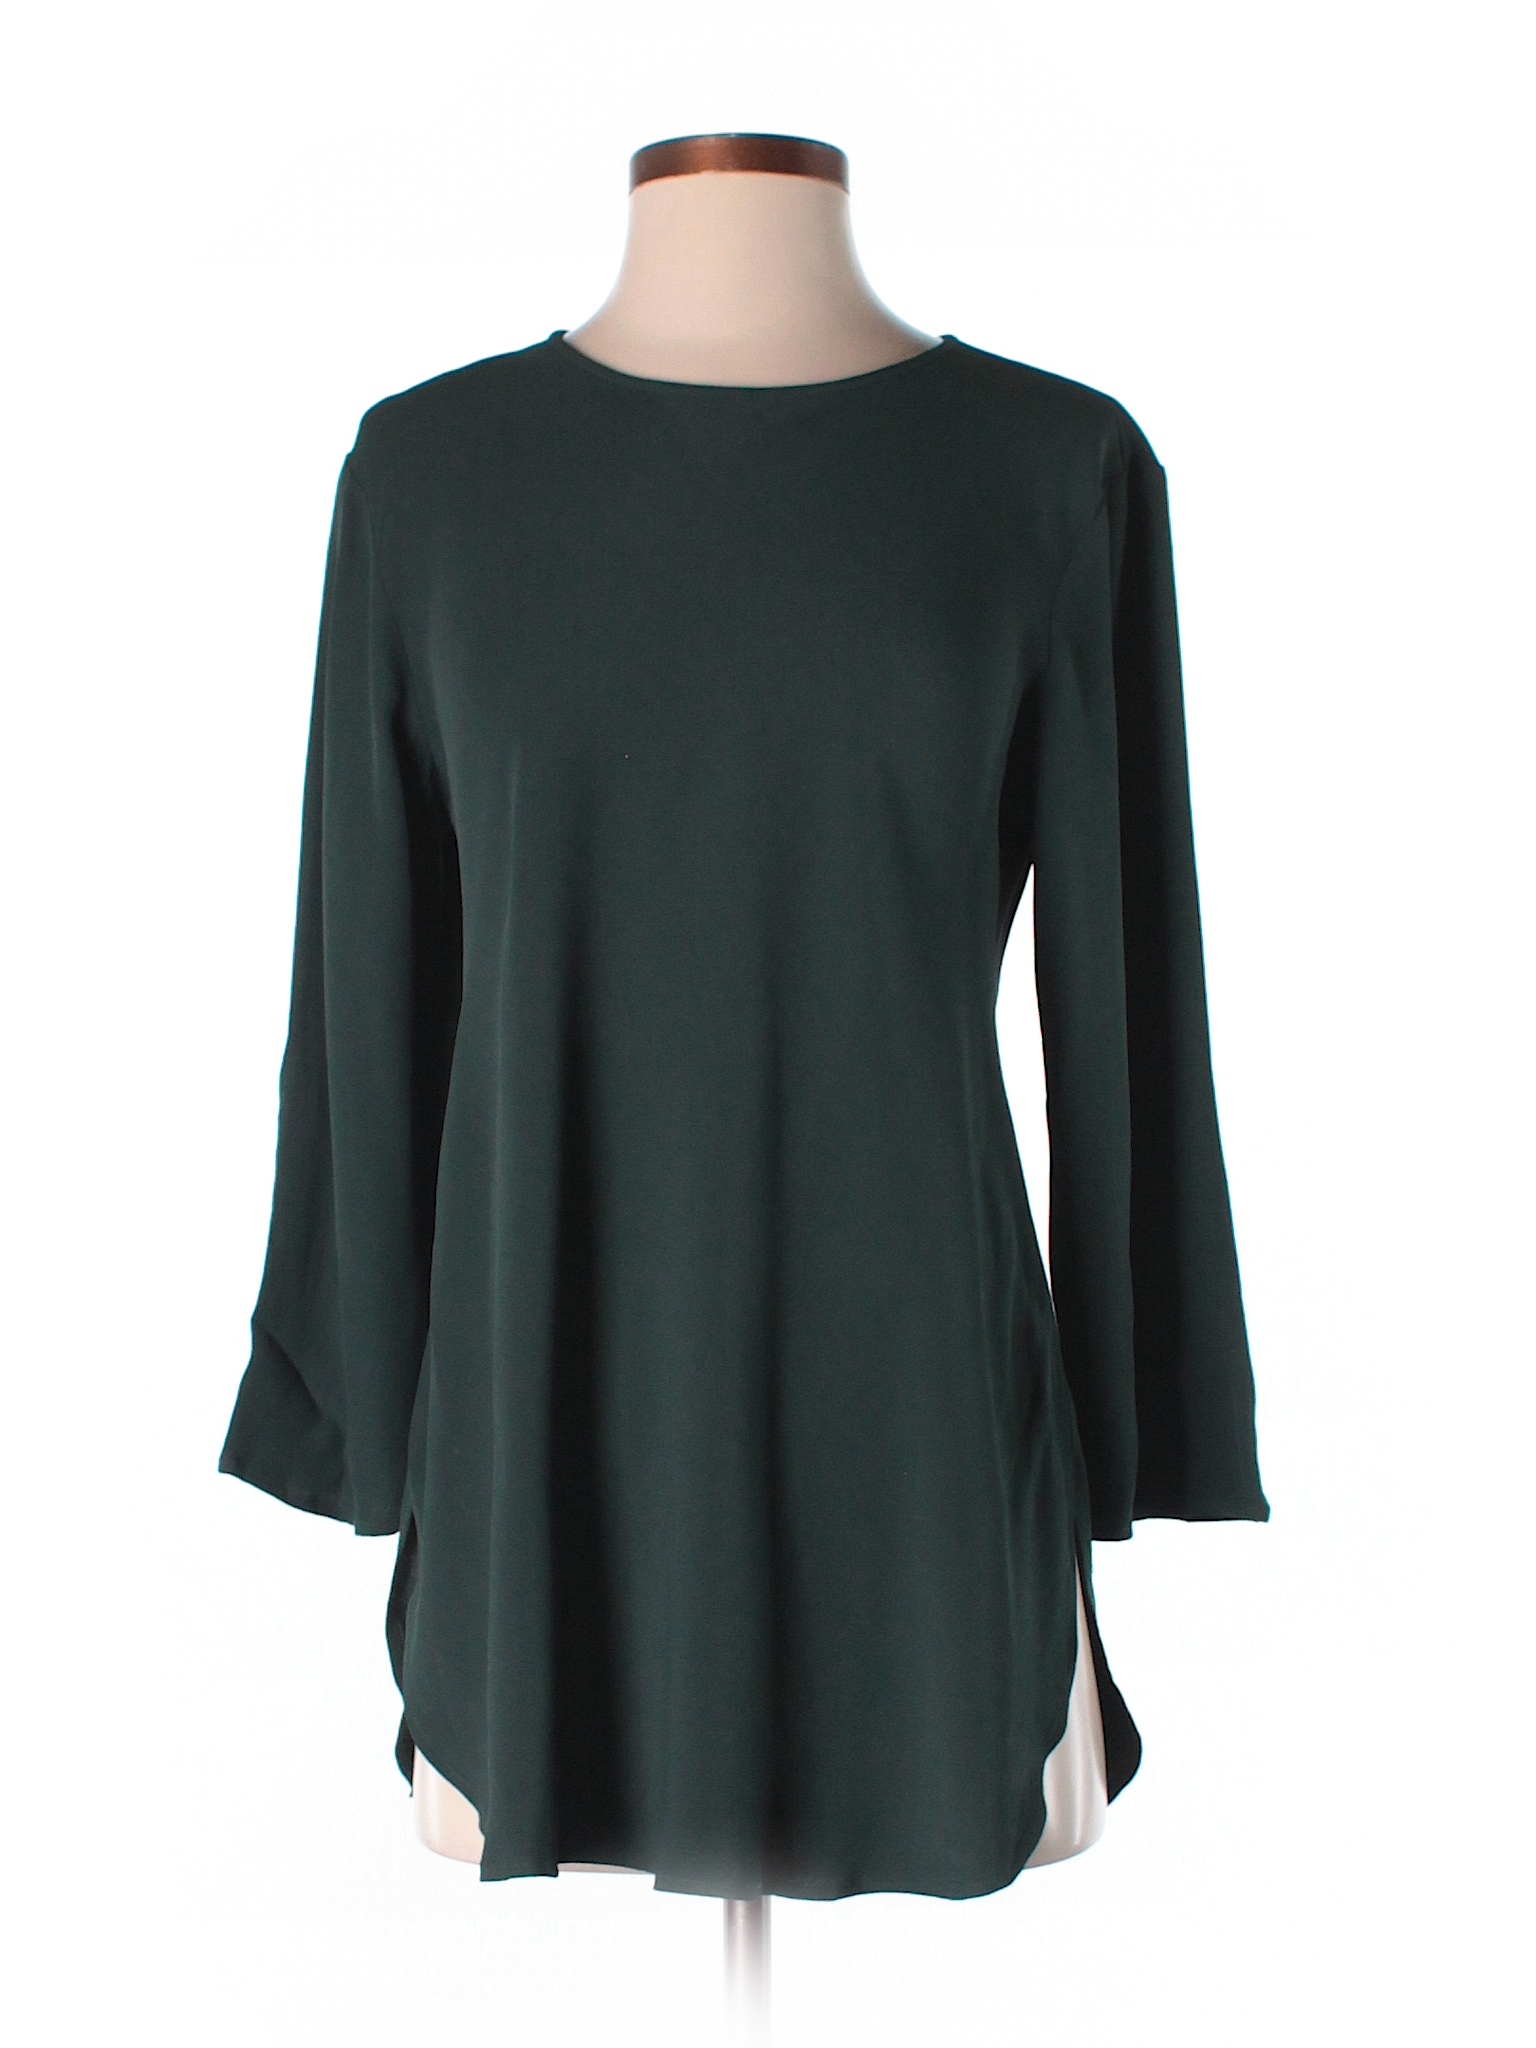 Ann Taylor 100% Viscose Solid Dark Green 3/4 Sleeve Blouse Size 4 - 65% ...